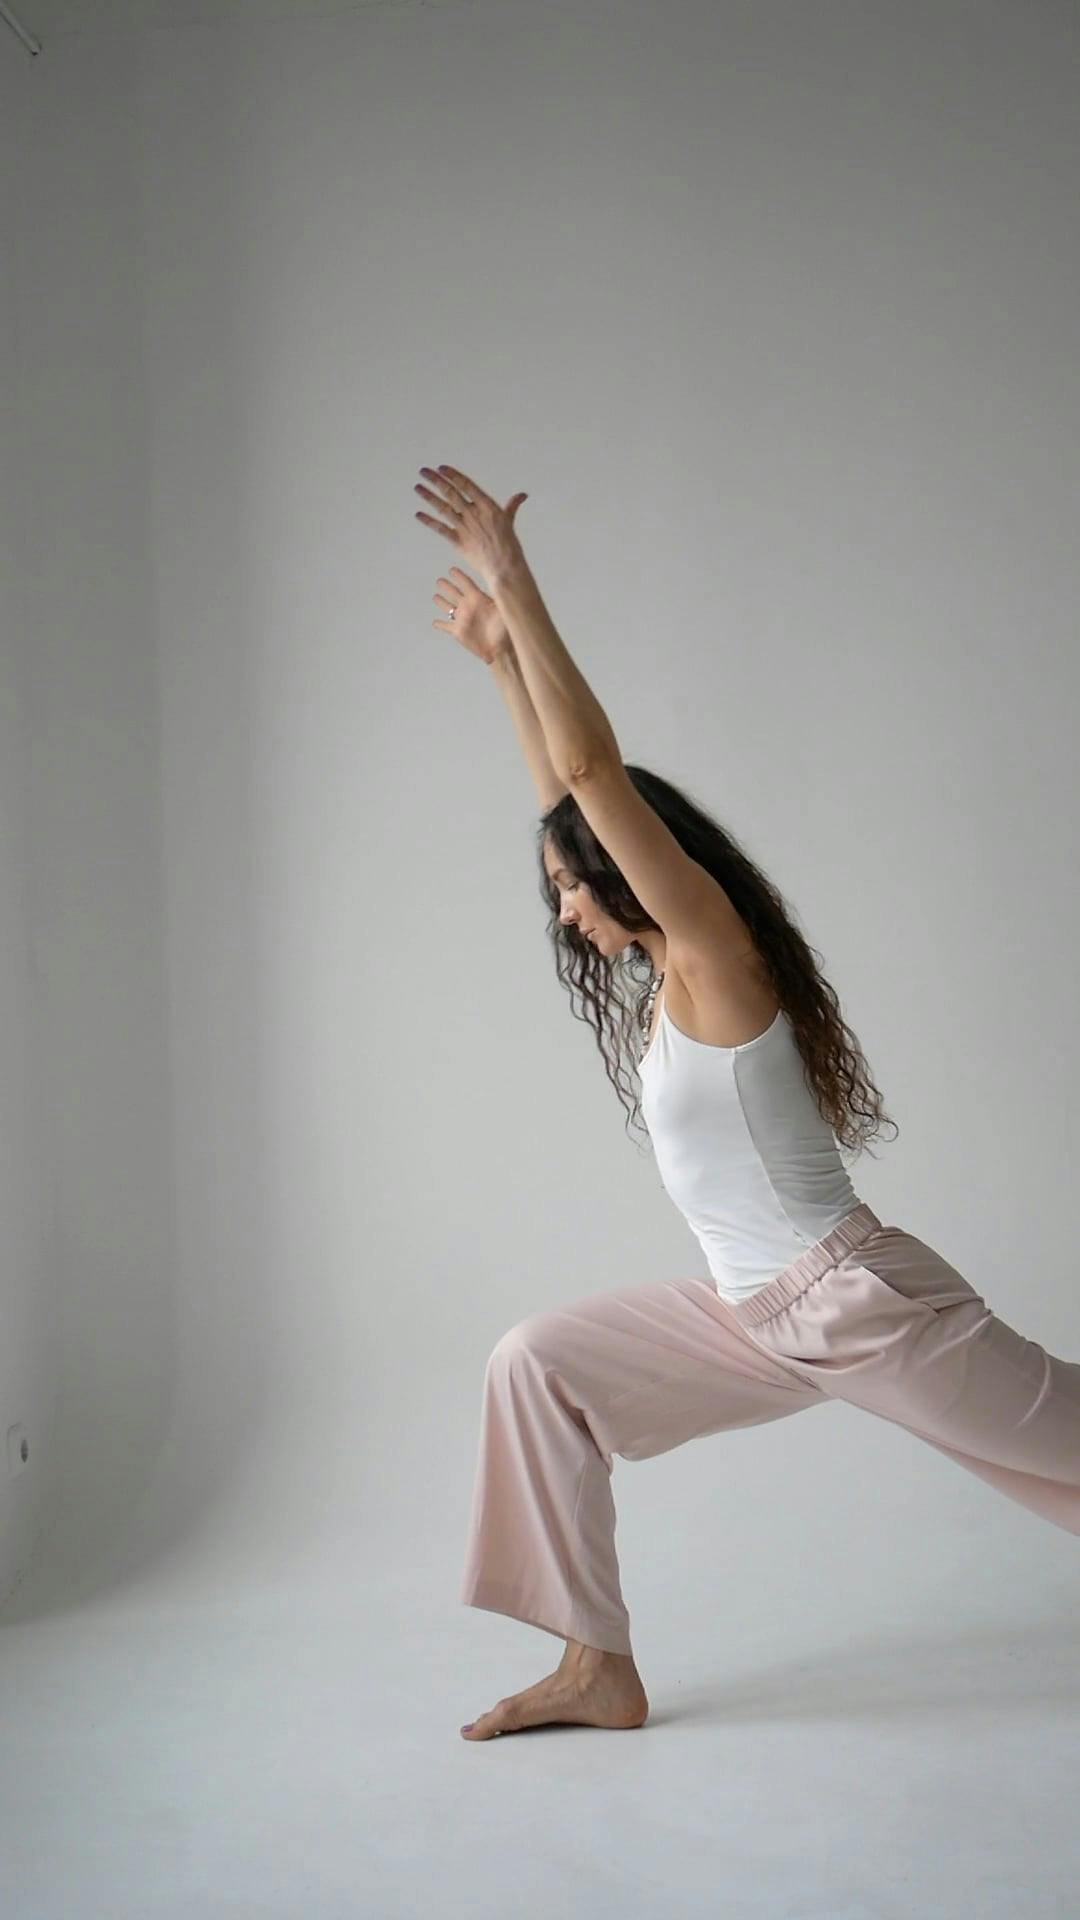 Discover more than 78 yoga poses video download